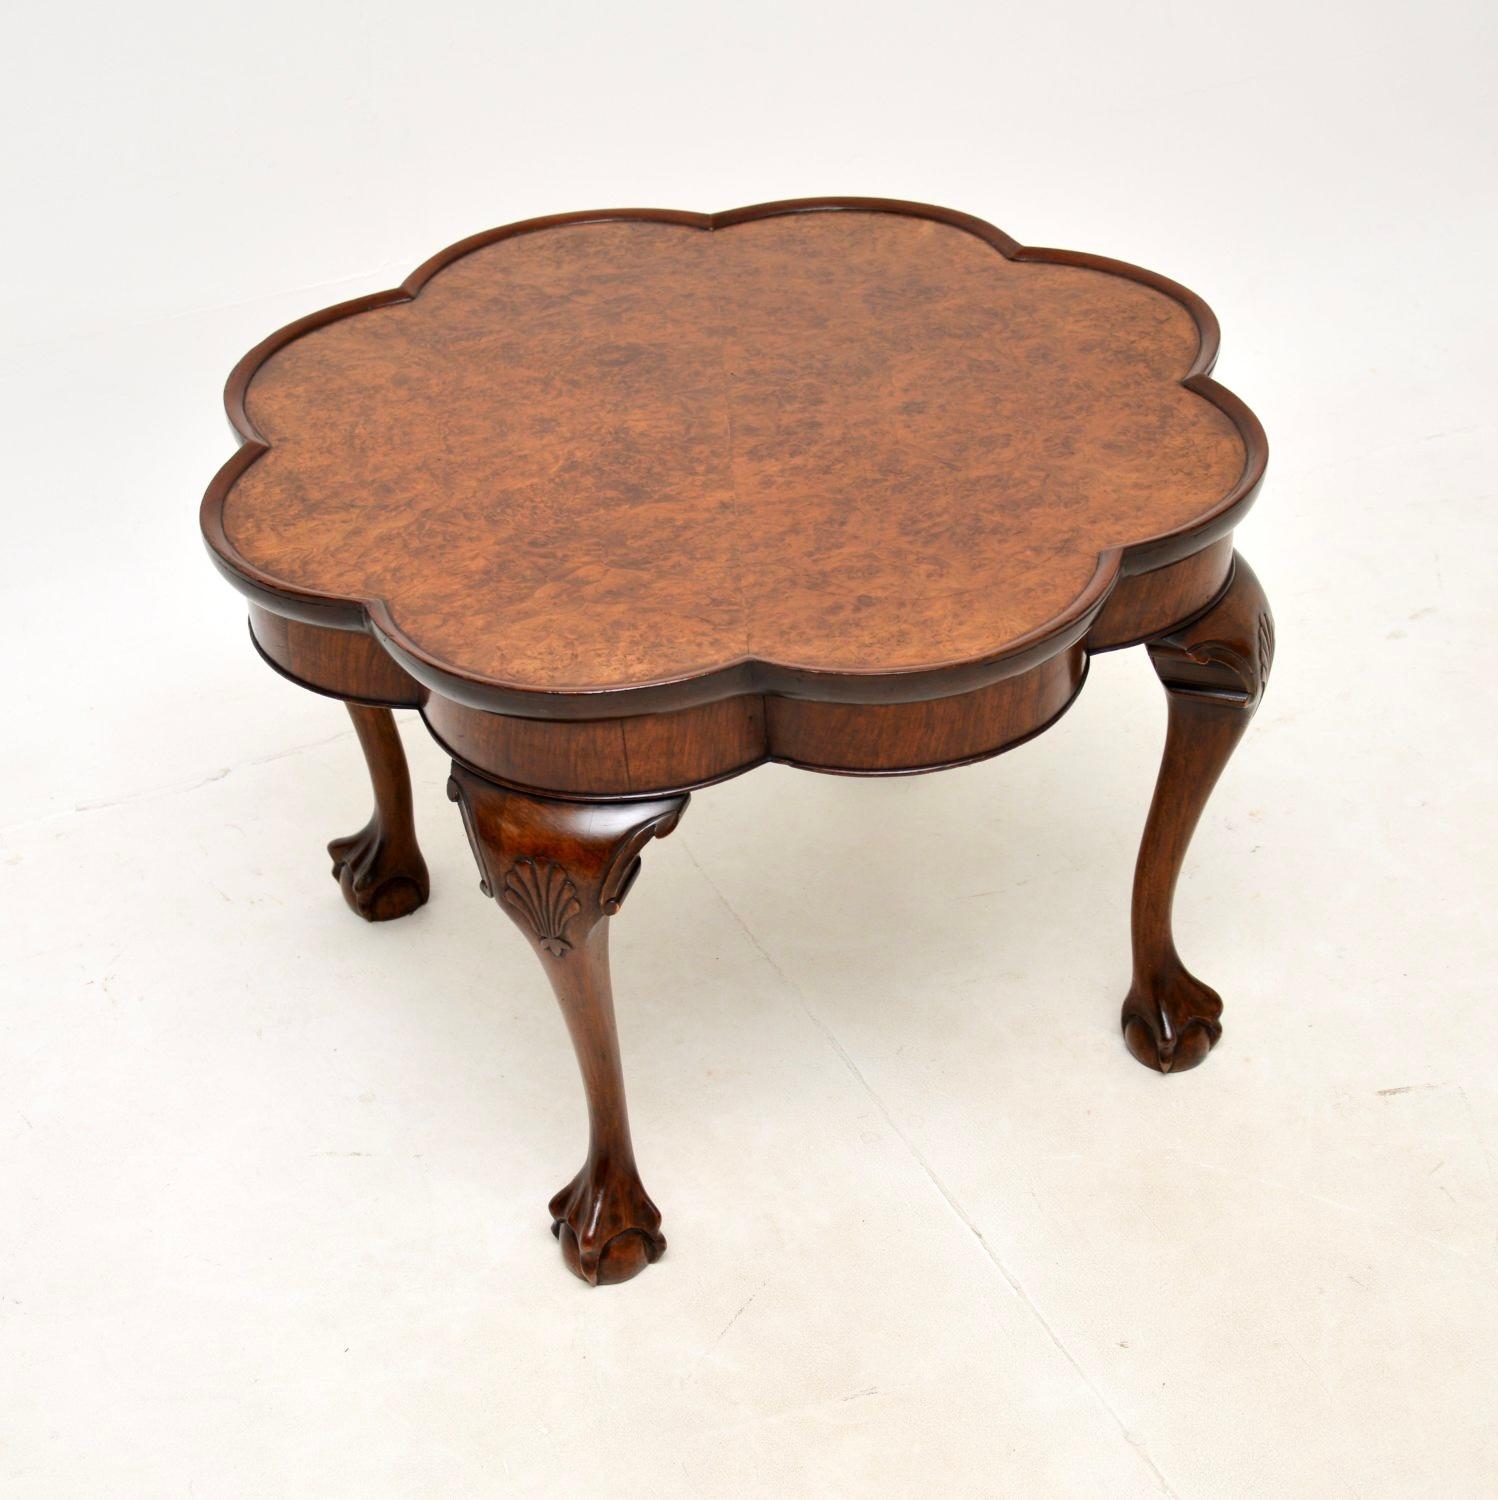 A fantastic antique burr walnut pie crust coffee table. This was made in England, it dates from the 1920-30’s.

The quality is outstanding, this is beautifully made and is a lovely size. The top has a flower shaped design with a raised pie crust